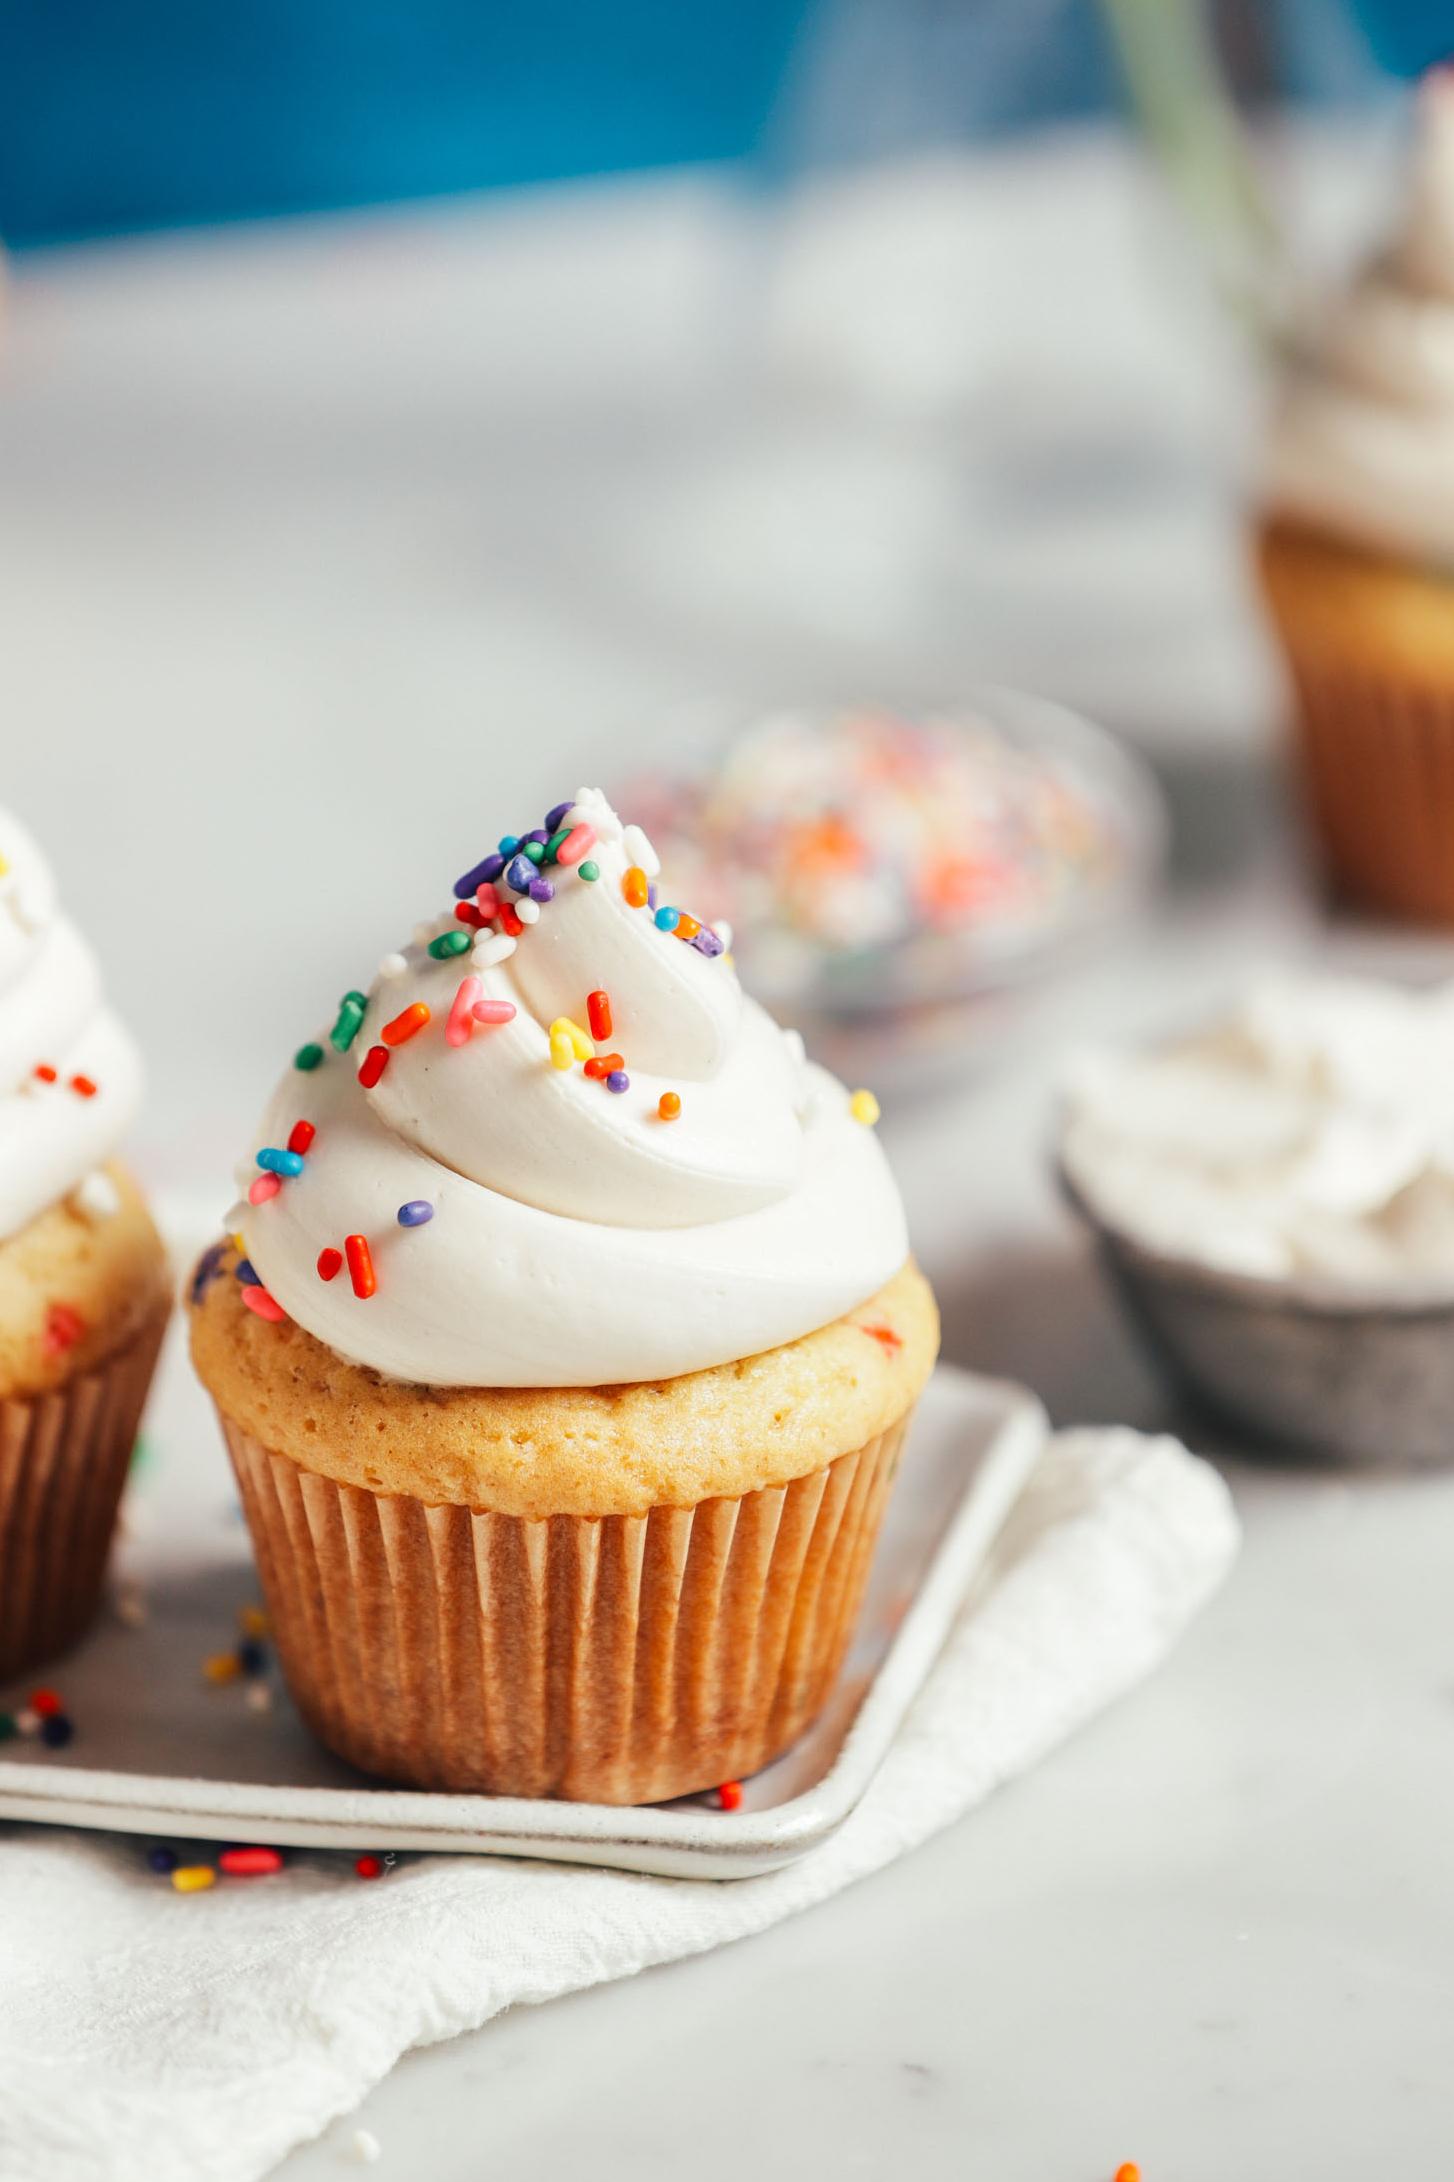  Elevate your baking game with this delicious frosting recipe.